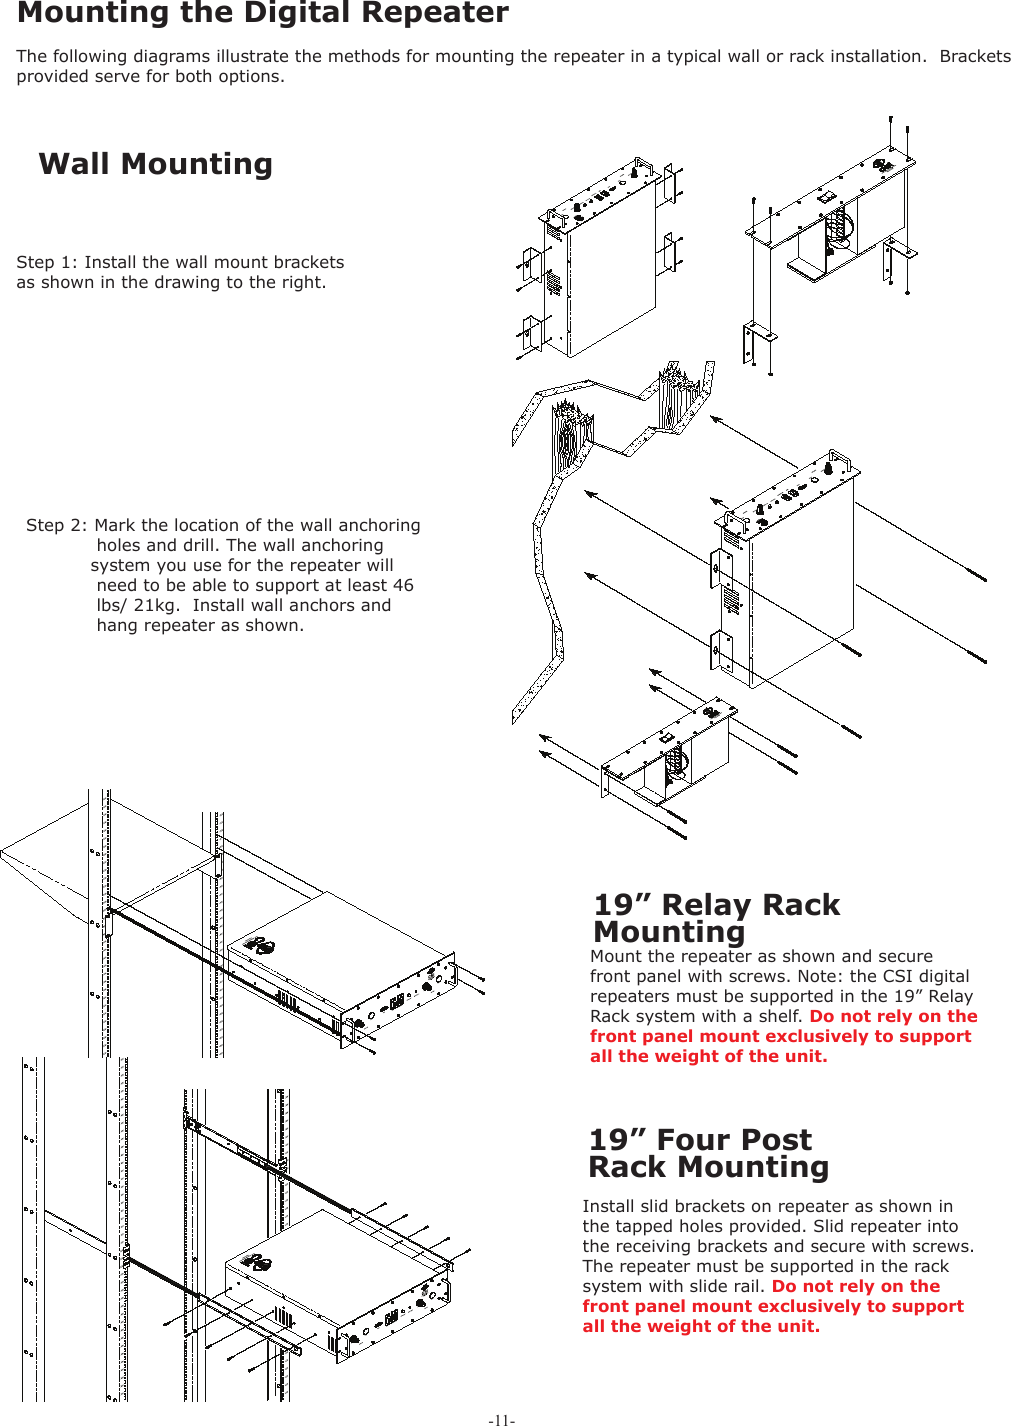 -11- Mounting the Digital RepeaterThe following diagrams illustrate the methods for mounting the repeater in a typical wall or rack installation.  Brackets provided serve for both options.Step 2: Mark the location of the wall anchoring            holes and drill. The wall anchoring            system you use for the repeater will            need to be able to support at least 46             lbs/ 21kg.  Install wall anchors and             hang repeater as shown.Step 1: Install the wall mount brackets as shown in the drawing to the right. Wall Mounting 19” Relay Rack Mounting Mount the repeater as shown and secure front panel with screws. Note: the CSI digital repeaters must be supported in the 19” Relay Rack system with a shelf. Do not rely on the front panel mount exclusively to support all the weight of the unit.Install slid brackets on repeater as shown in the tapped holes provided. Slid repeater into the receiving brackets and secure with screws. The repeater must be supported in the rack system with slide rail. Do not rely on the front panel mount exclusively to support all the weight of the unit.19” Four PostRack Mounting 